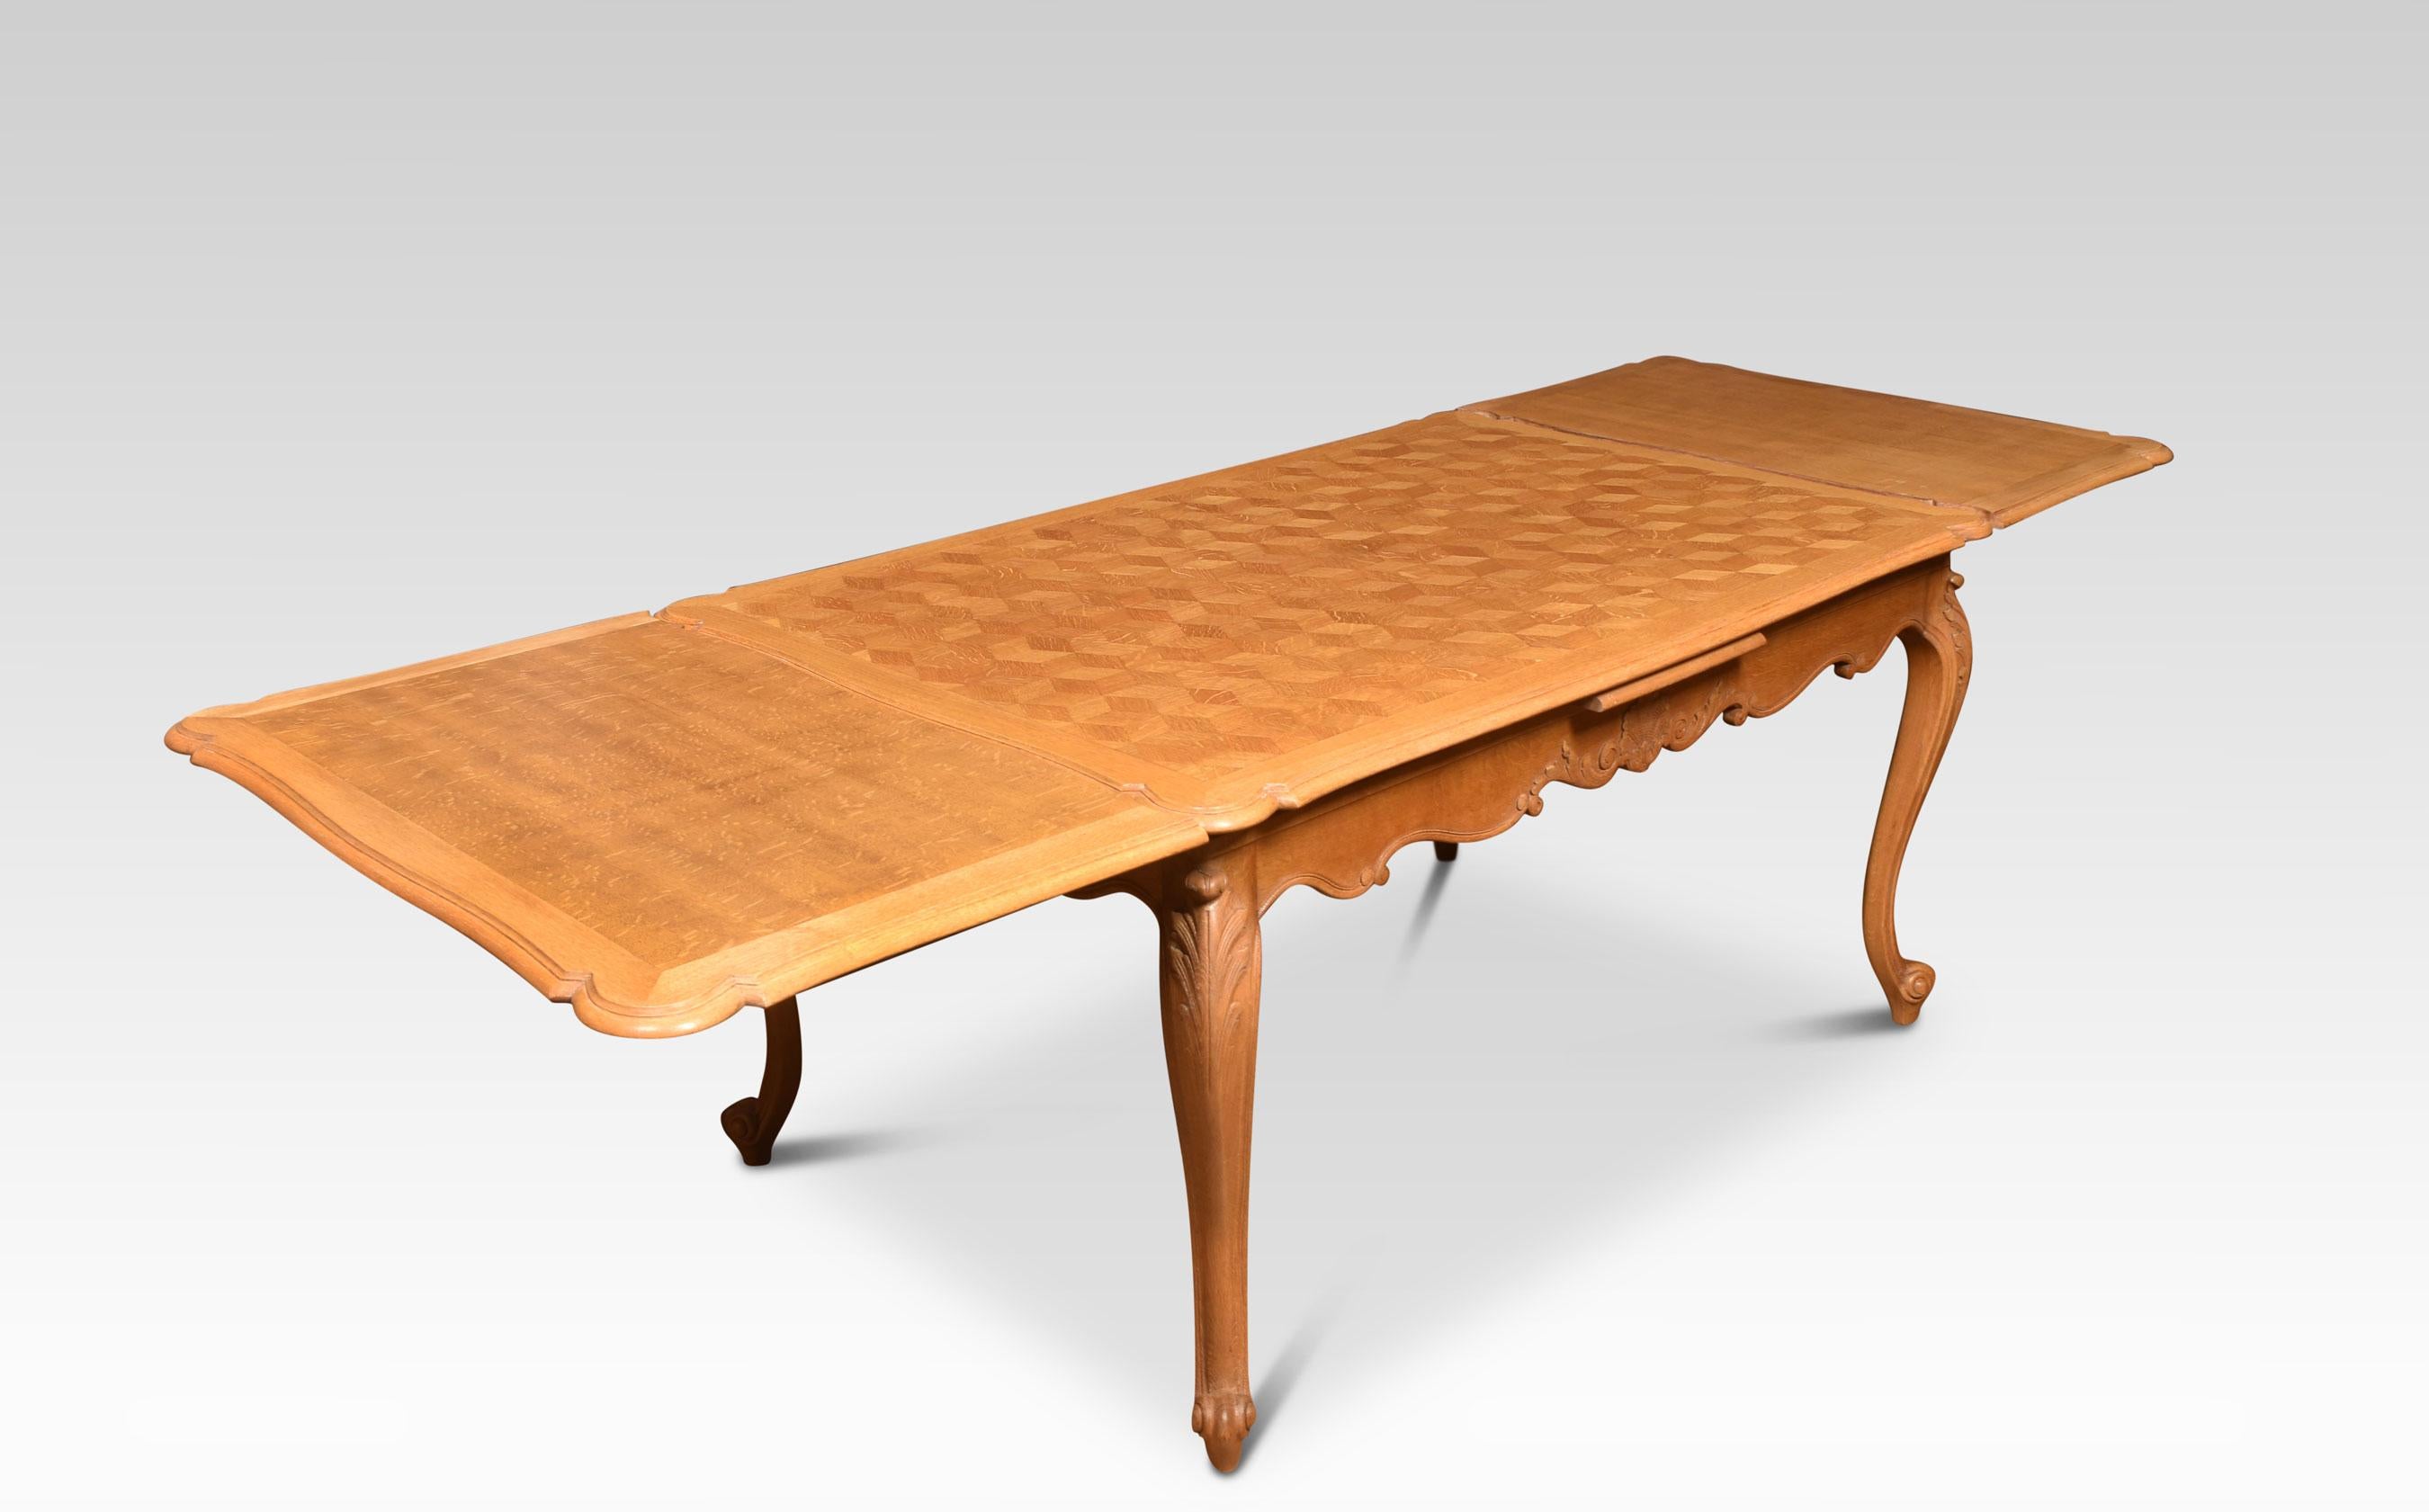 French Provincial style draw leaf dining table, the oak parquet top with two pull-out leaves above the shaped carved apron. All raised up on cabriole legs.
Dimensions
Height 30.5 Inches
Width 59.5 Inches when open 105 Inches
Depth 39 Inches